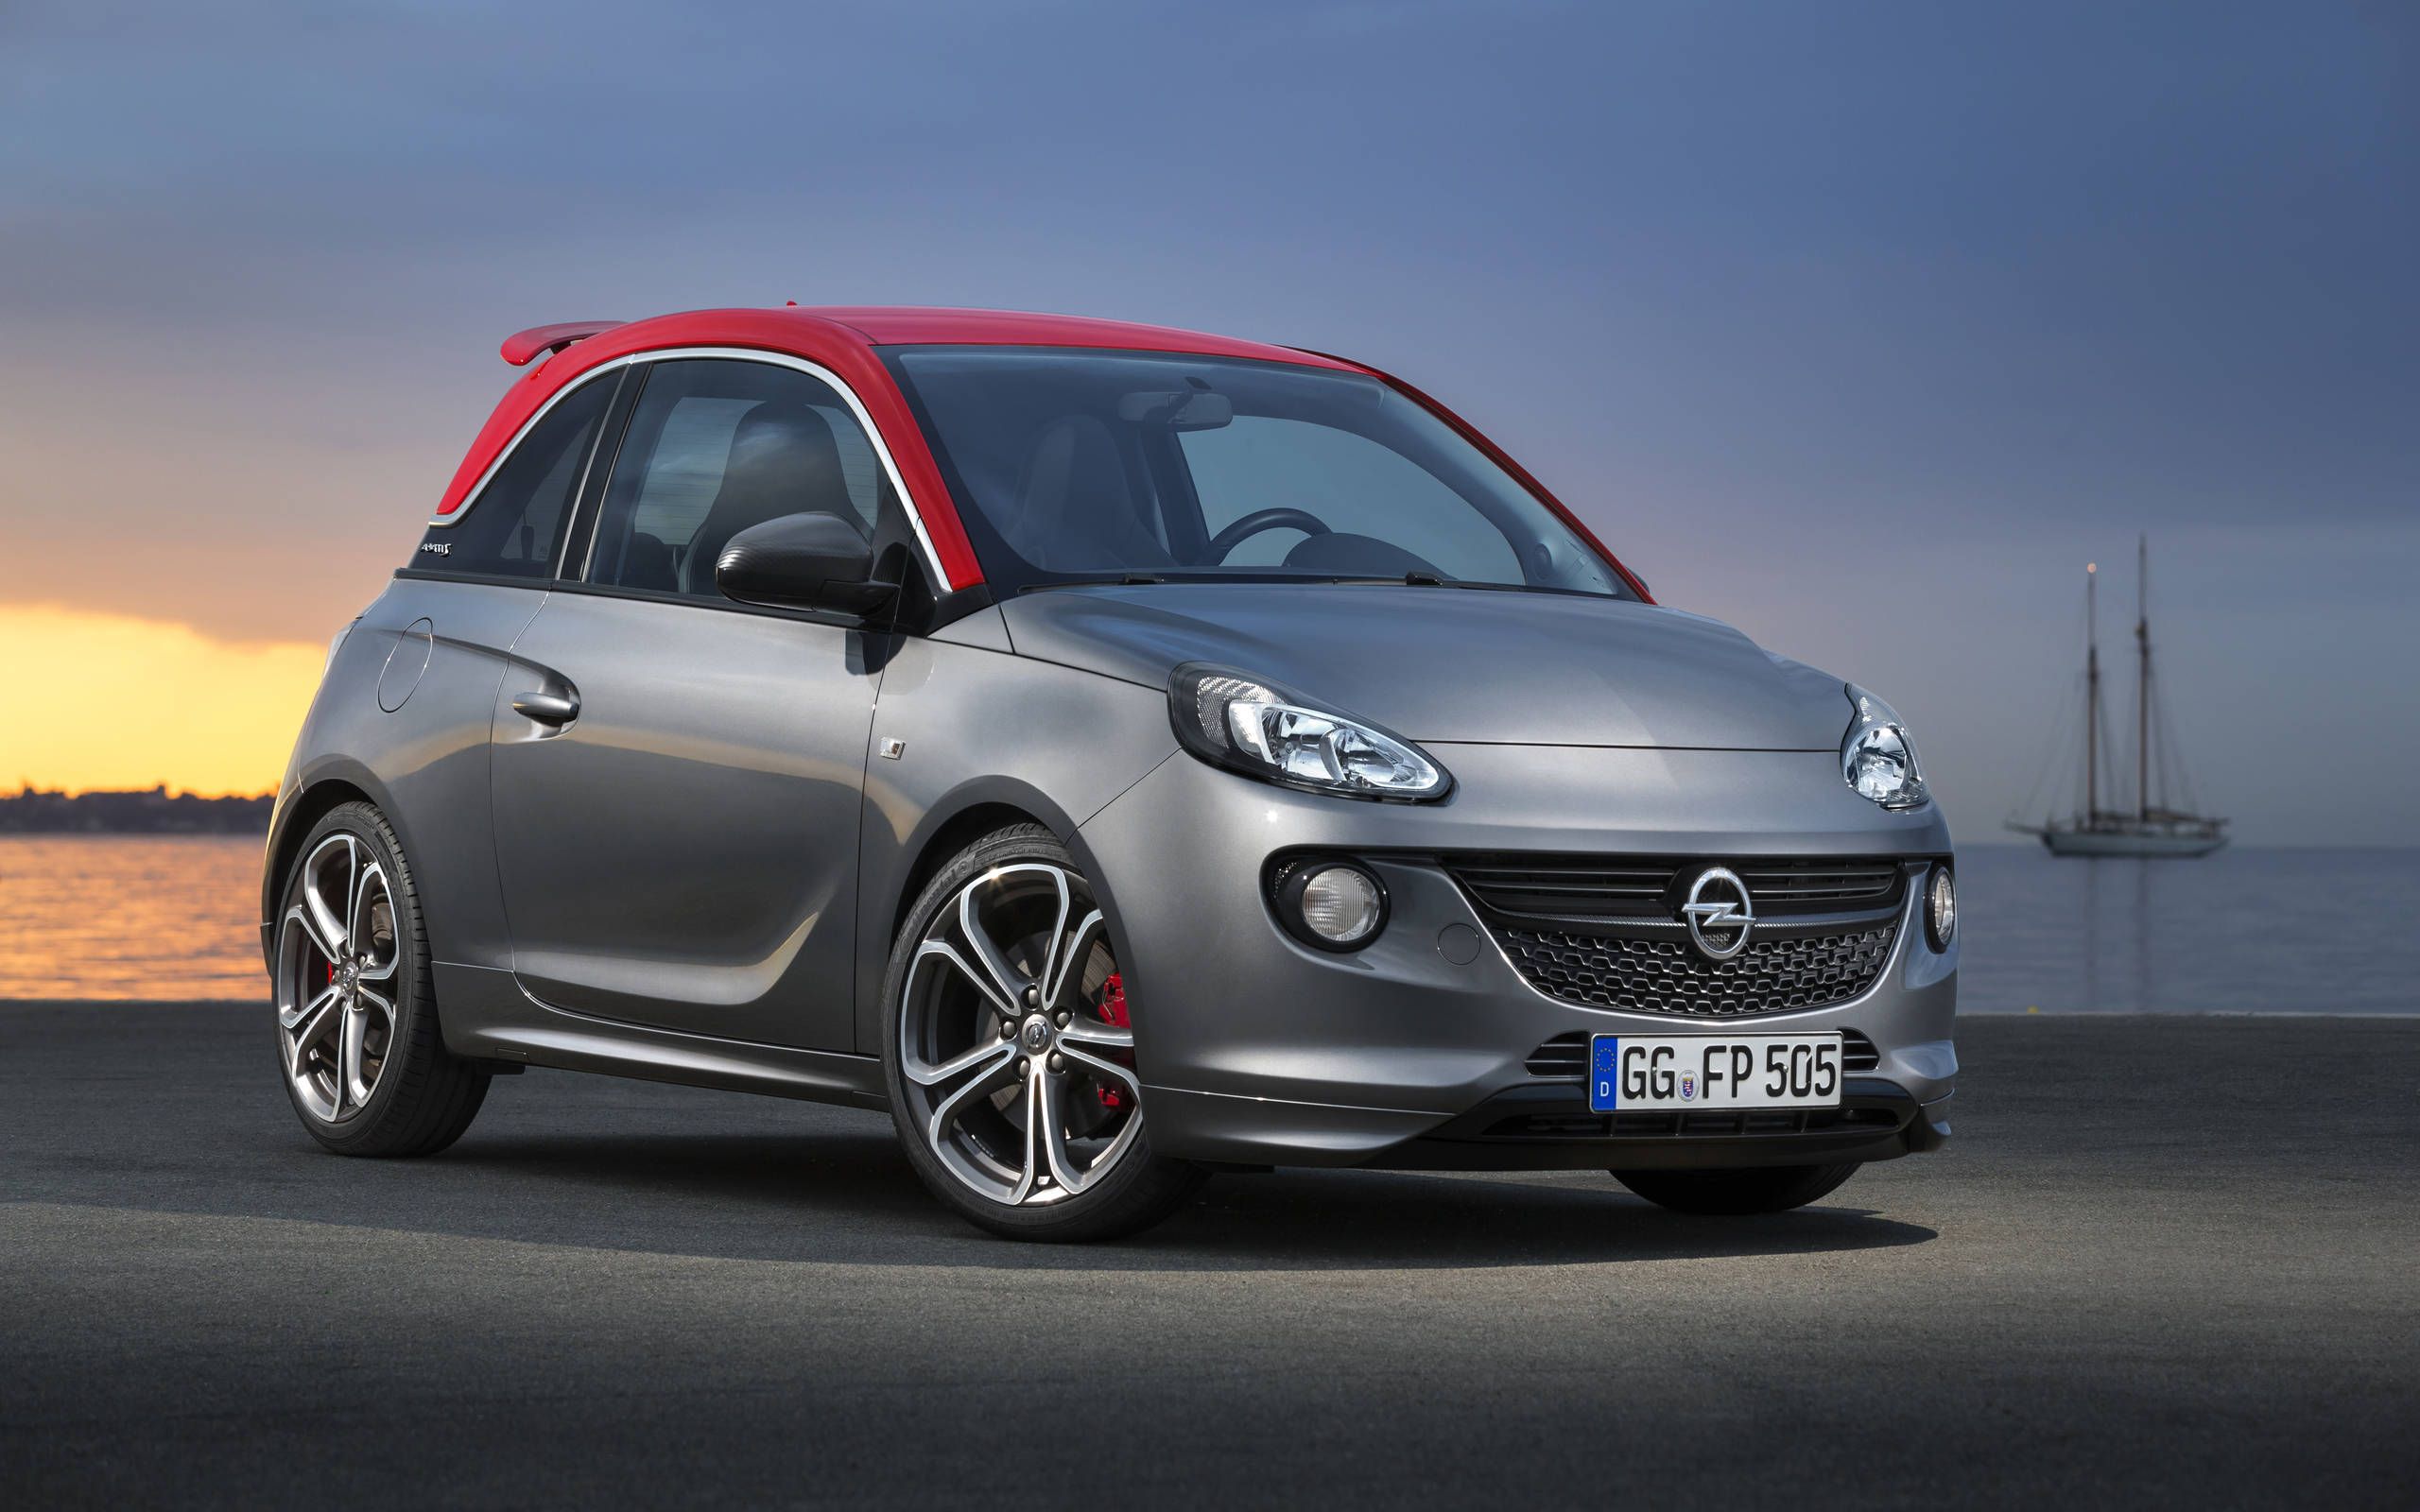 2013 Opel Adam: Like a Person, But It's a Car